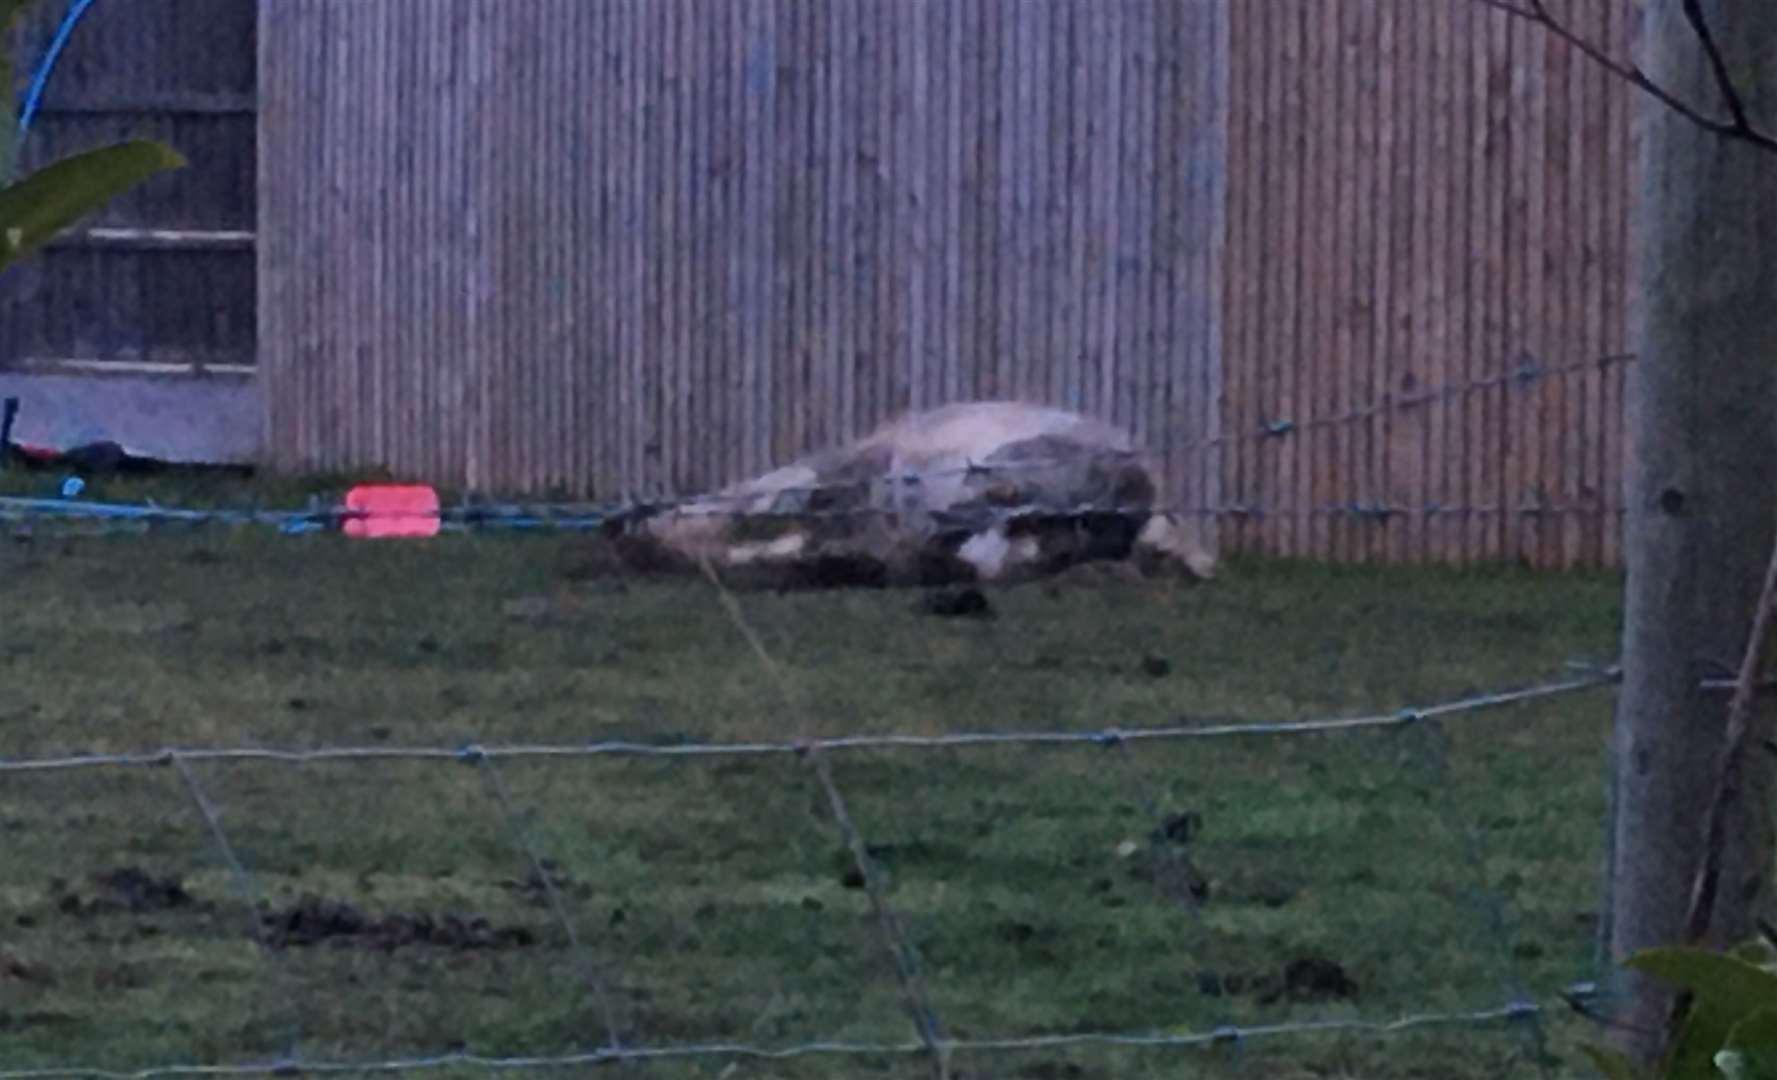 A dead horse was also reported in Spade Lane, Hartlip